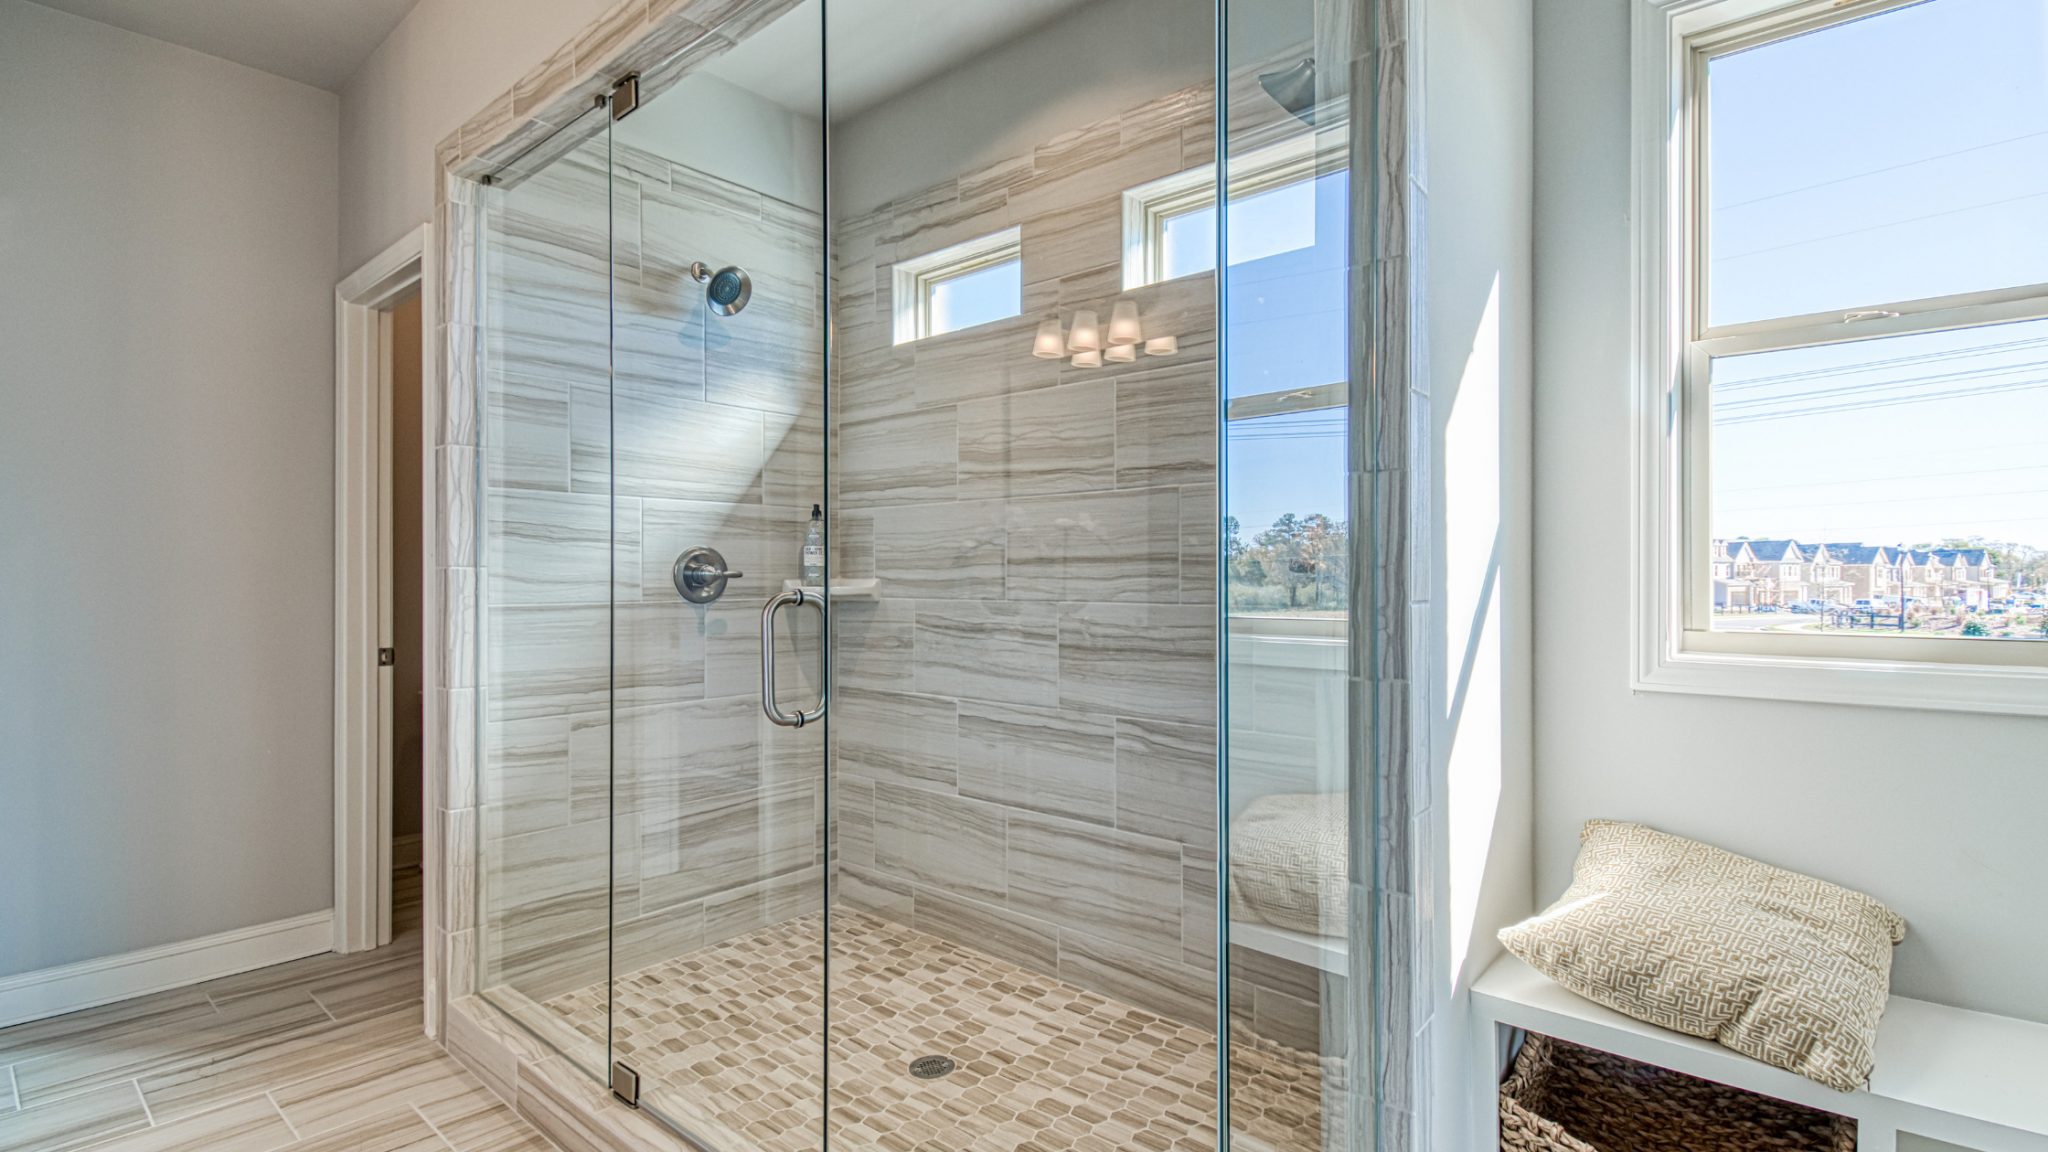 How To Clean A Glass Shower Door With Vinegar